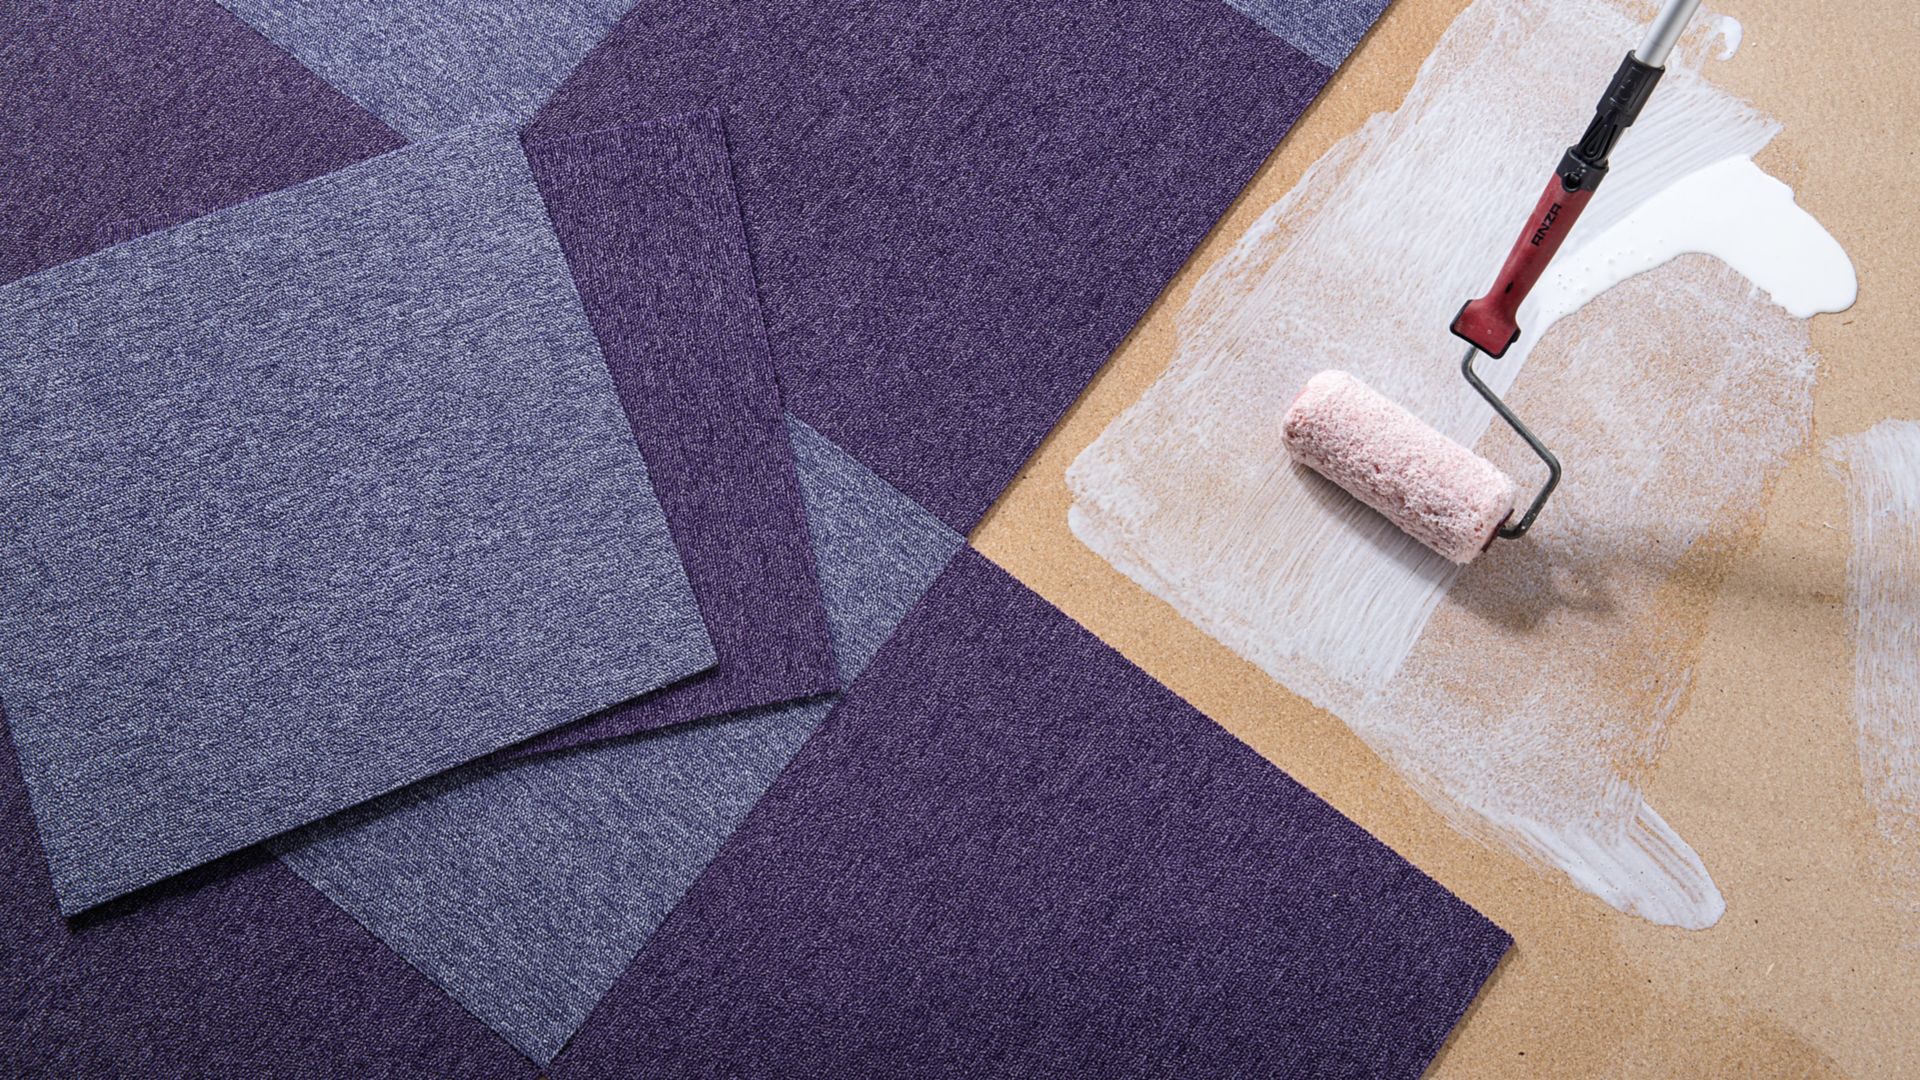 Purple carpet tile floor being bonded with adhesive applied by roller brush, view from above